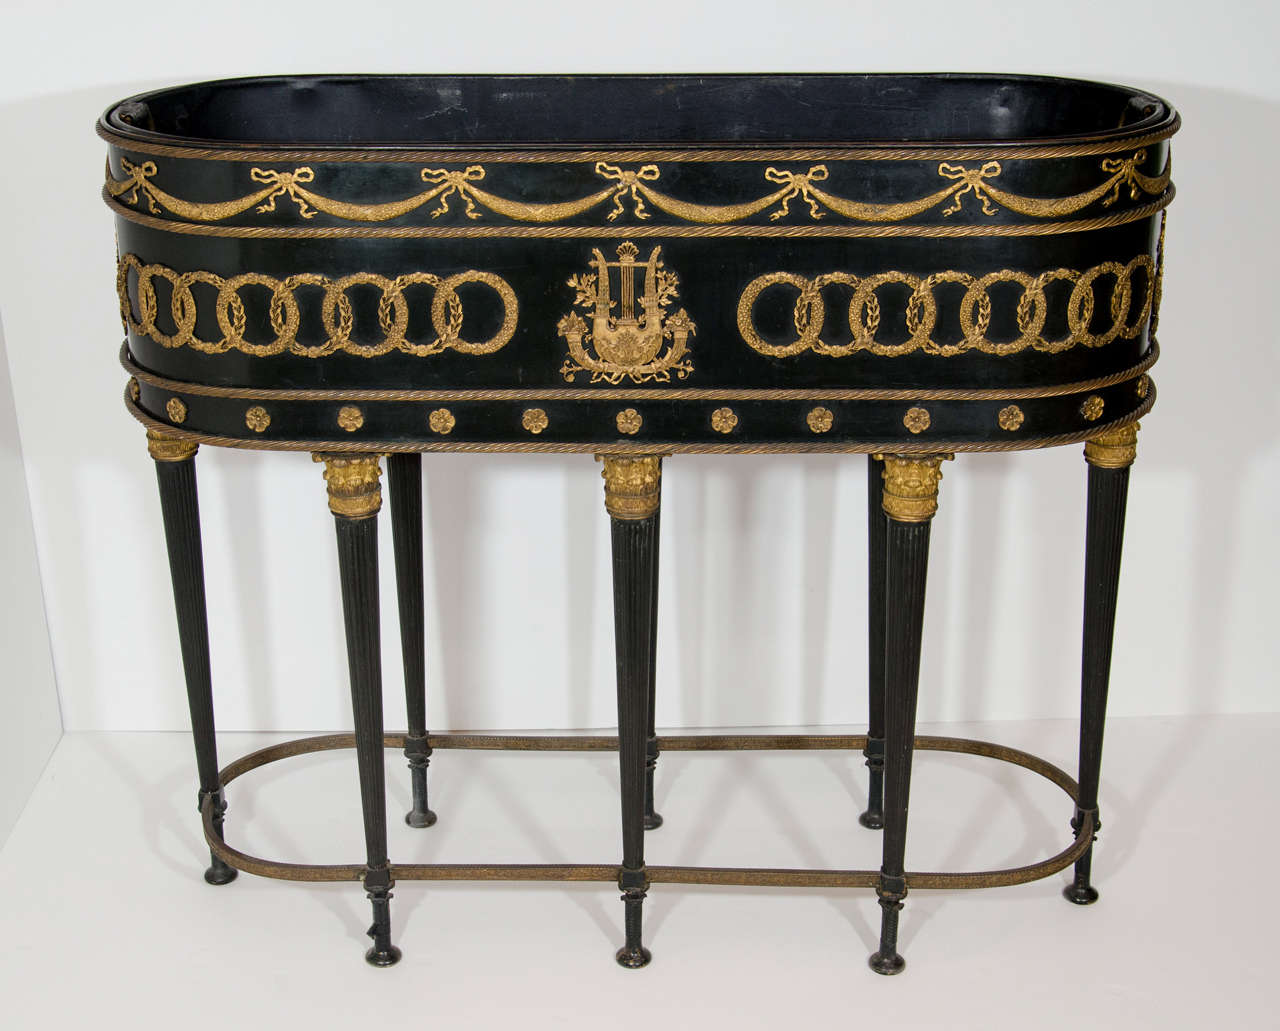 Patinated Large Antique French Empire Neoclassical Gilt Bronze and Patina Bronze Planter For Sale